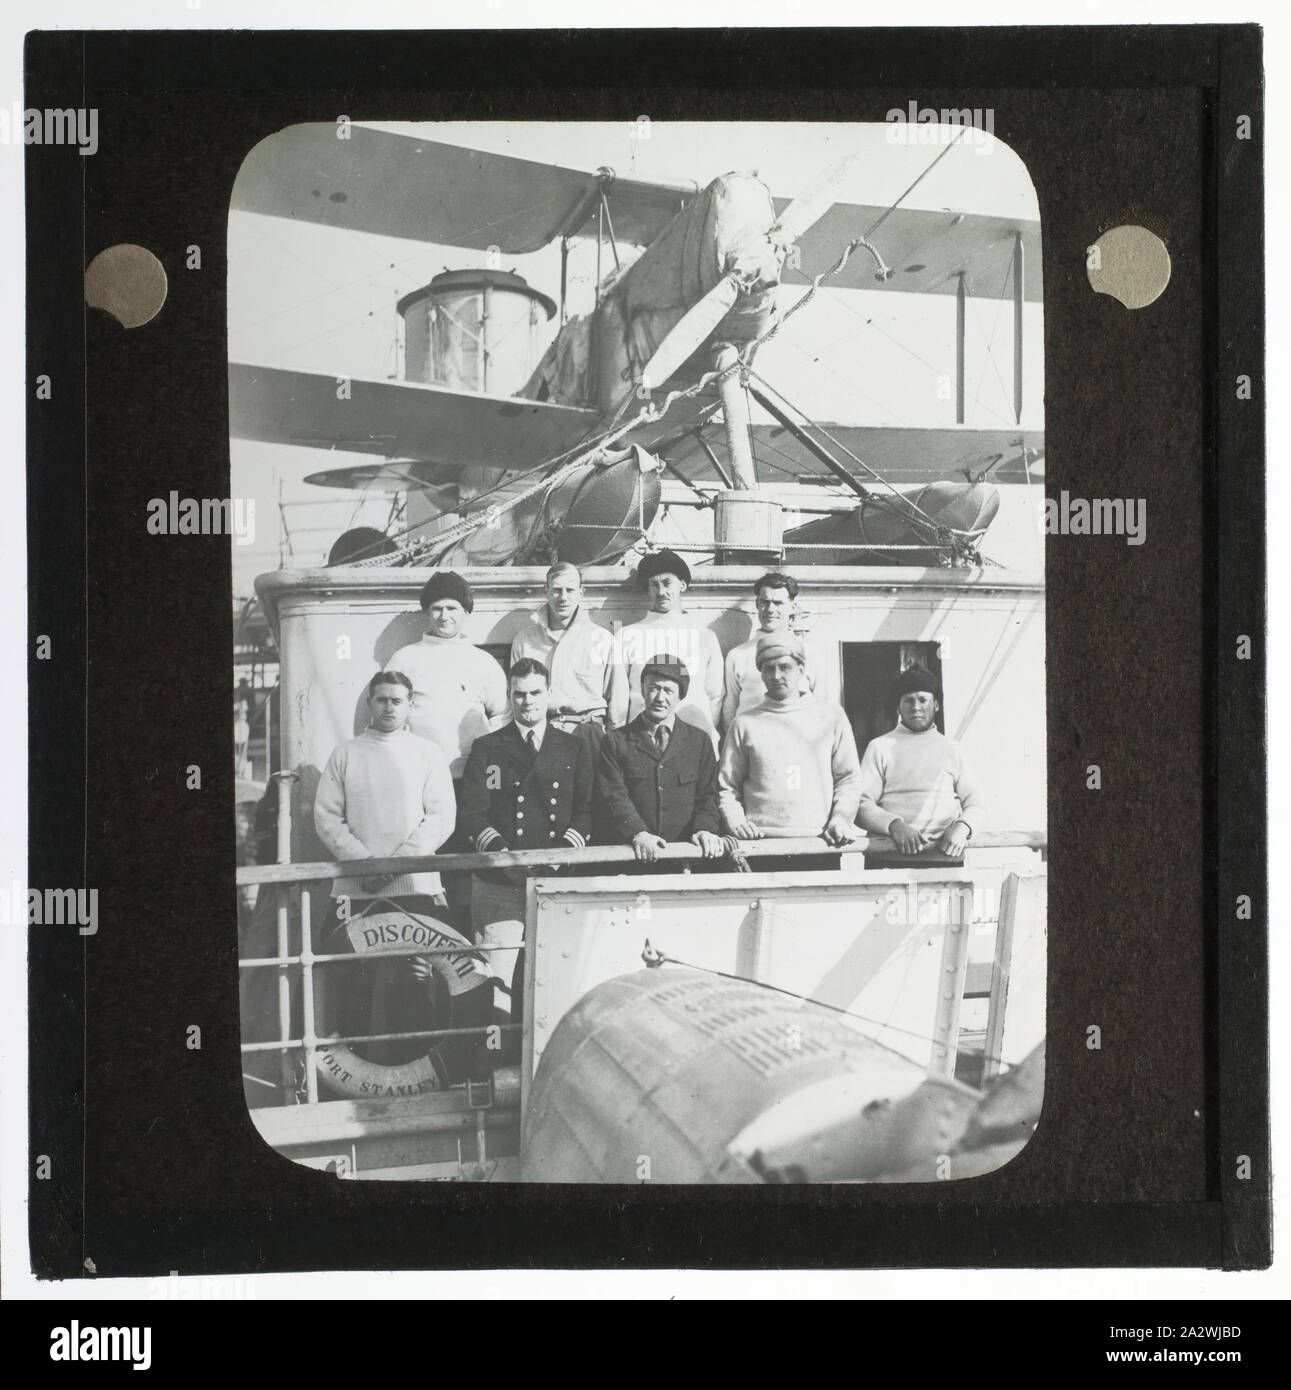 Lantern Slide - Crew with Lieutenant Hill & Ellsworth. Ellsworth Relief Expedition, Discovery II, Antarctica, 1936, Lantern slide of the crew aboard the Discovery II, Ellsworth Relief Expedition, Antarctica. One of 328 images in various formats including artworks, photographs, glass negatives and lantern slides Stock Photo